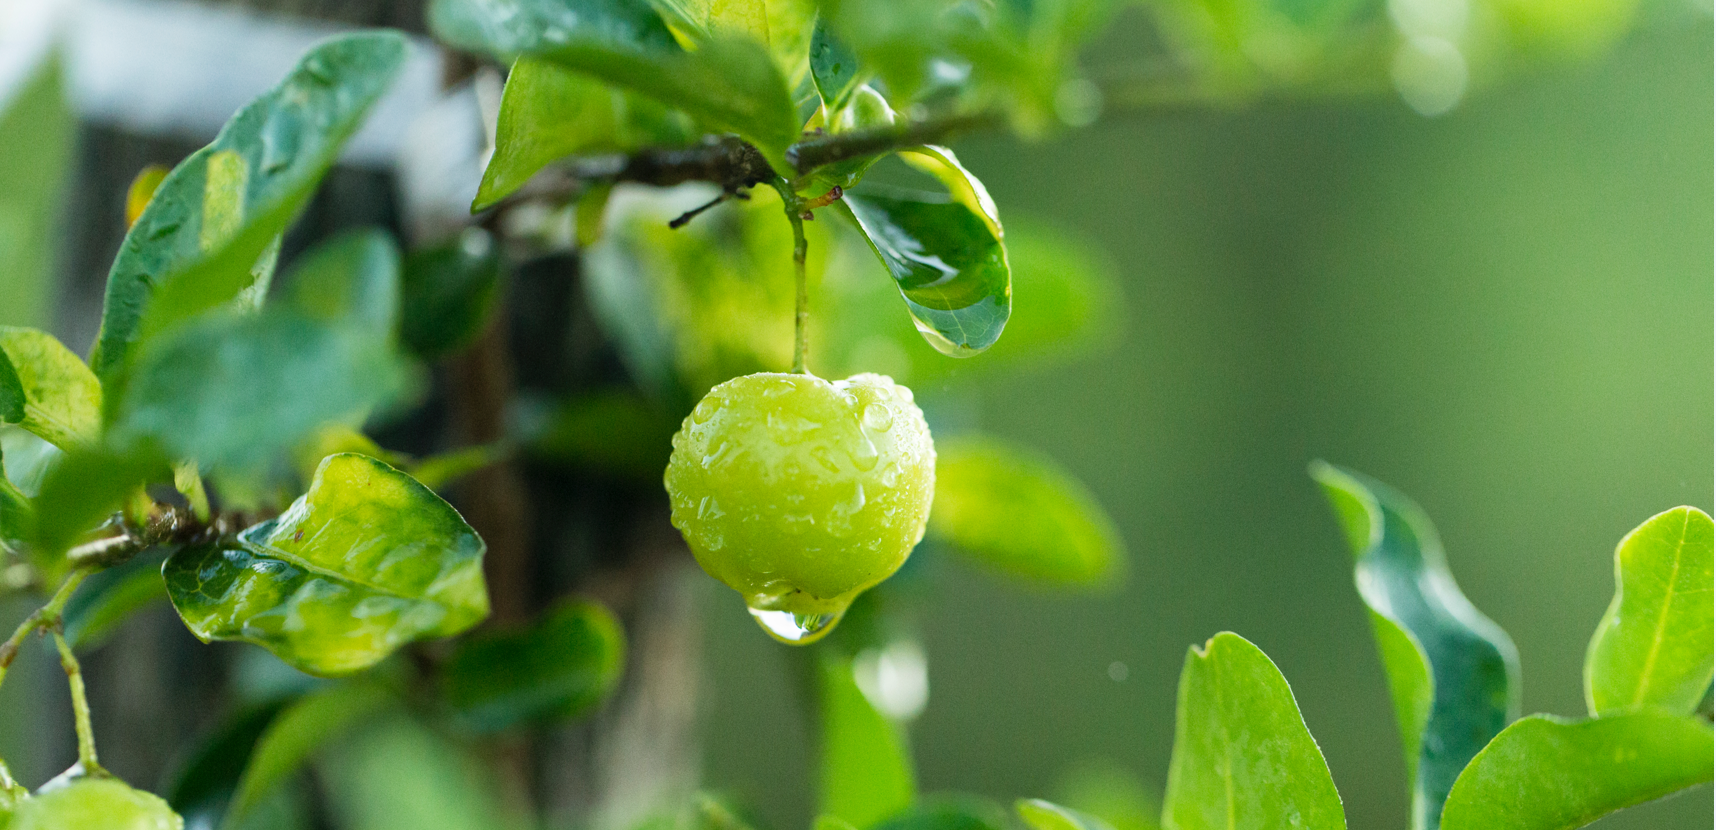 Small green fruit hanging from a tree with water dripping from it